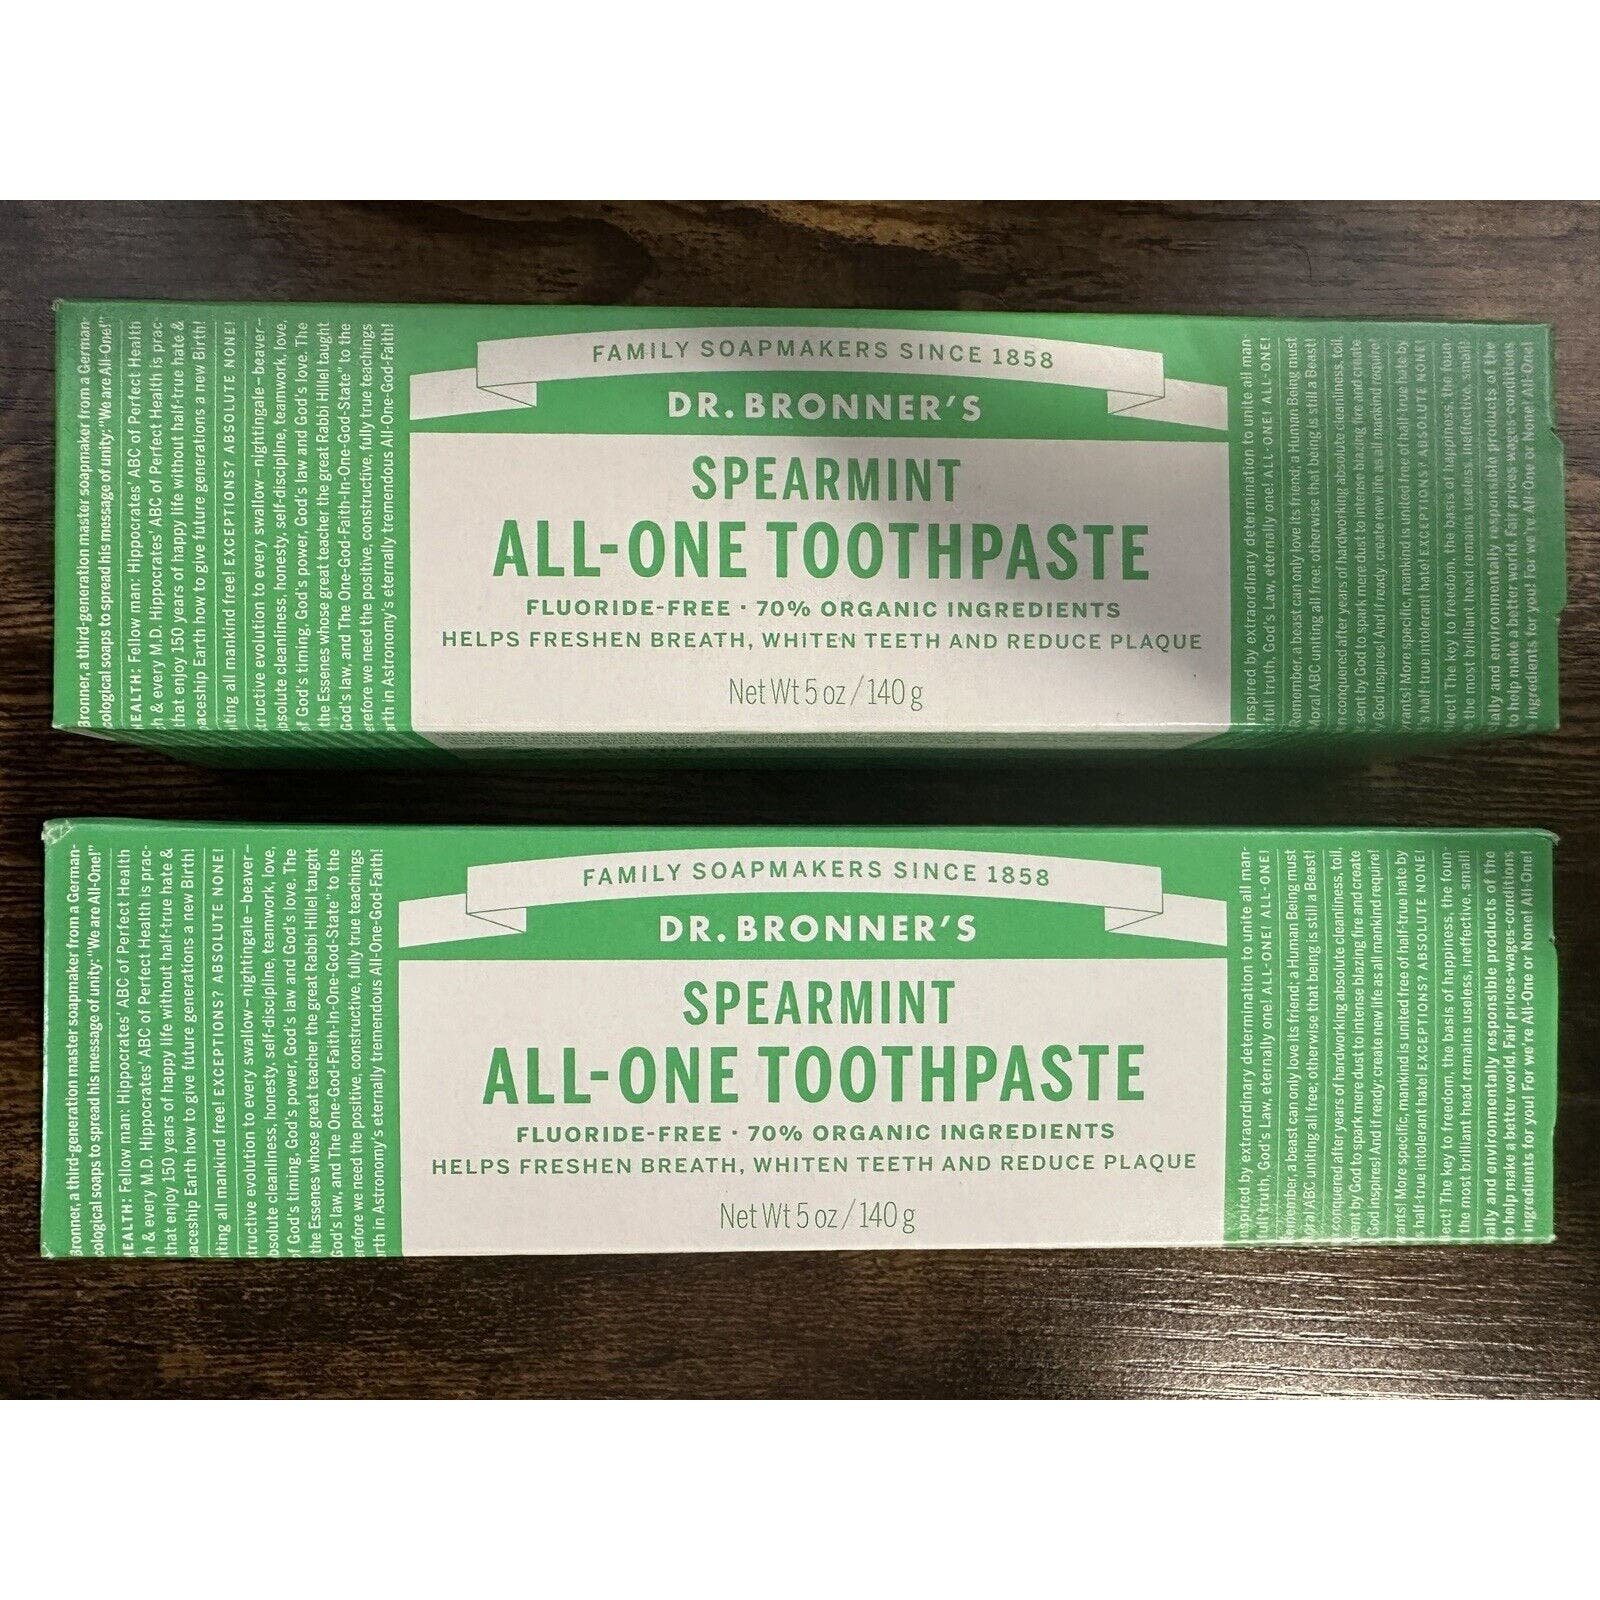 Dr. Bronner´s All-One Toothpaste Spearmint Fluoride-Free 70% Organic Lot of 2 ETIQpjxH0